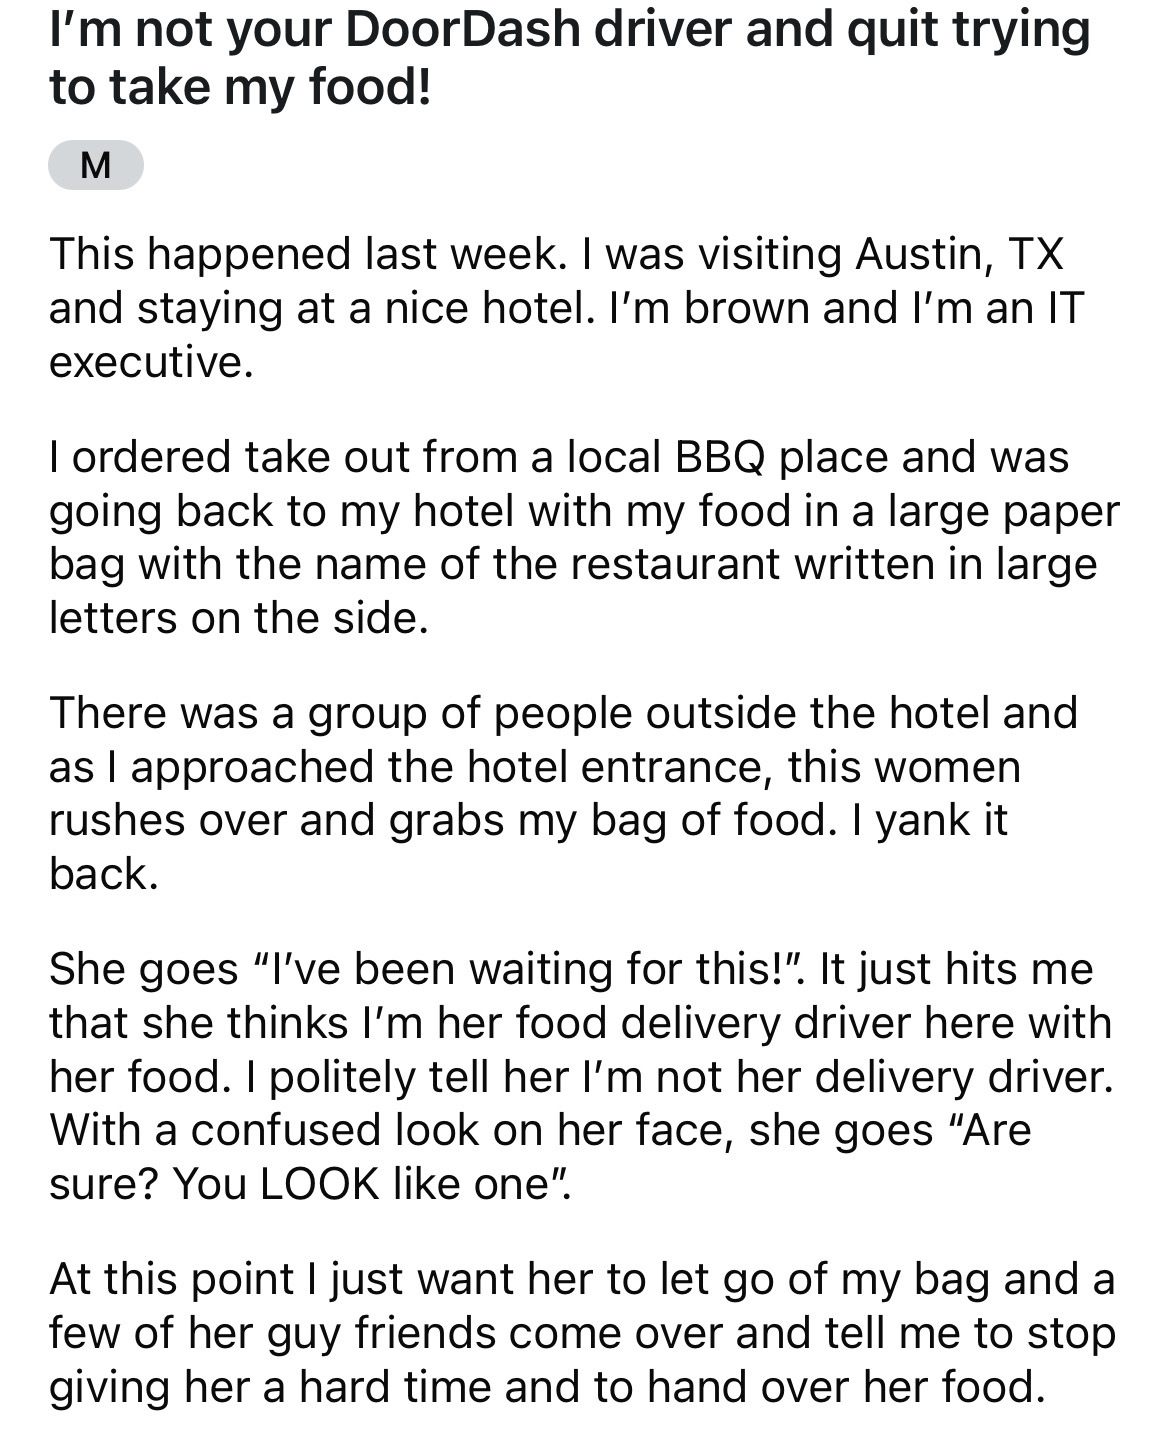 document - I'm not your DoorDash driver and quit trying to take my food! M This happened last week. I was visiting Austin, Tx and staying at a nice hotel. I'm brown and I'm an It executive. I ordered take out from a local Bbq place and was going back to m